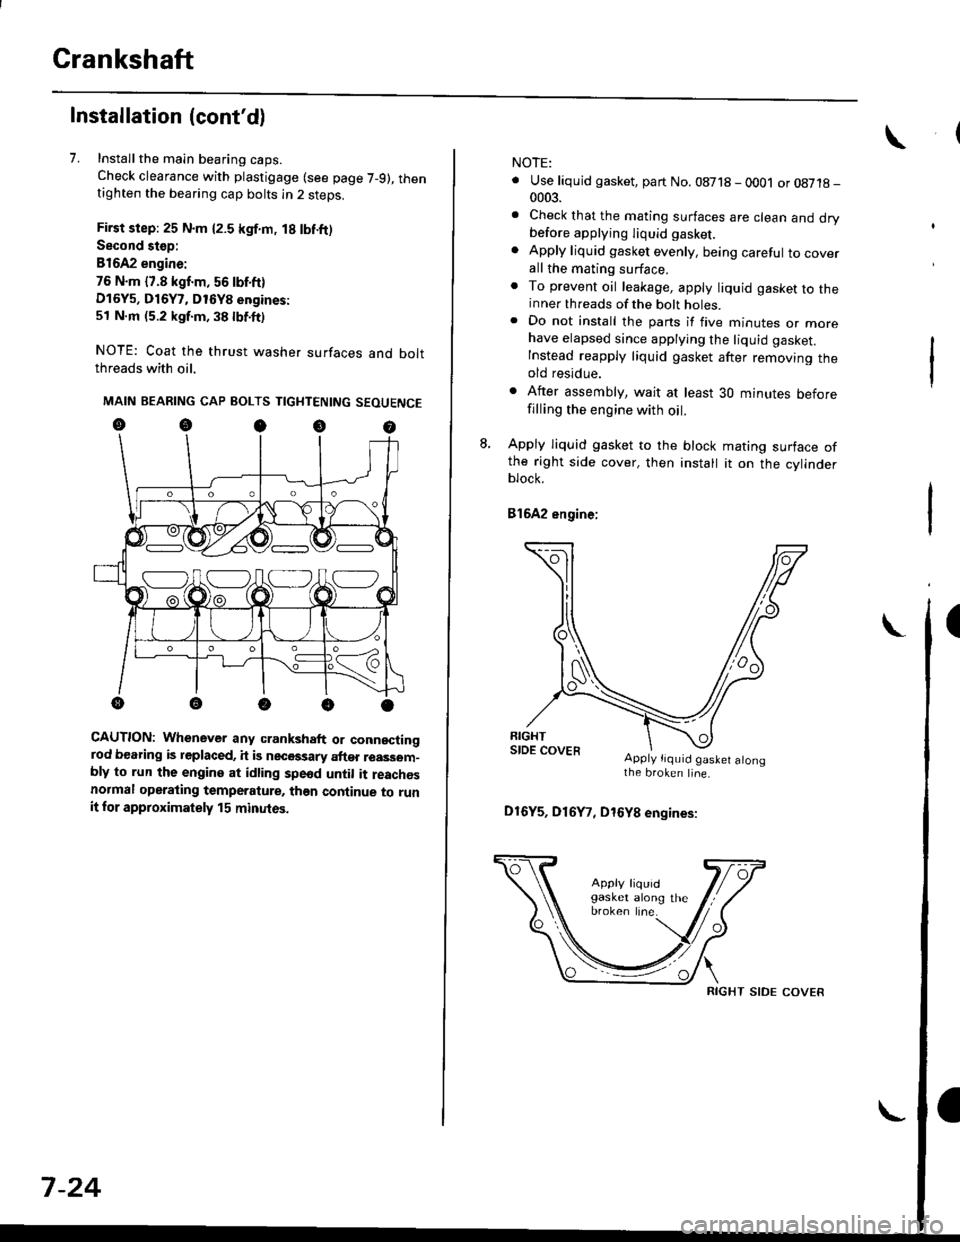 HONDA CIVIC 1999 6.G Service Manual Crankshaft
Installation (contd)
7. Installthe main bearing caps.
Check clearance with plastigage (see page 7-9), thentighten the bearing cap bolts in 2 steps.
First step: 25 N.m {2.5 kgf.m, 18 lbf.ft